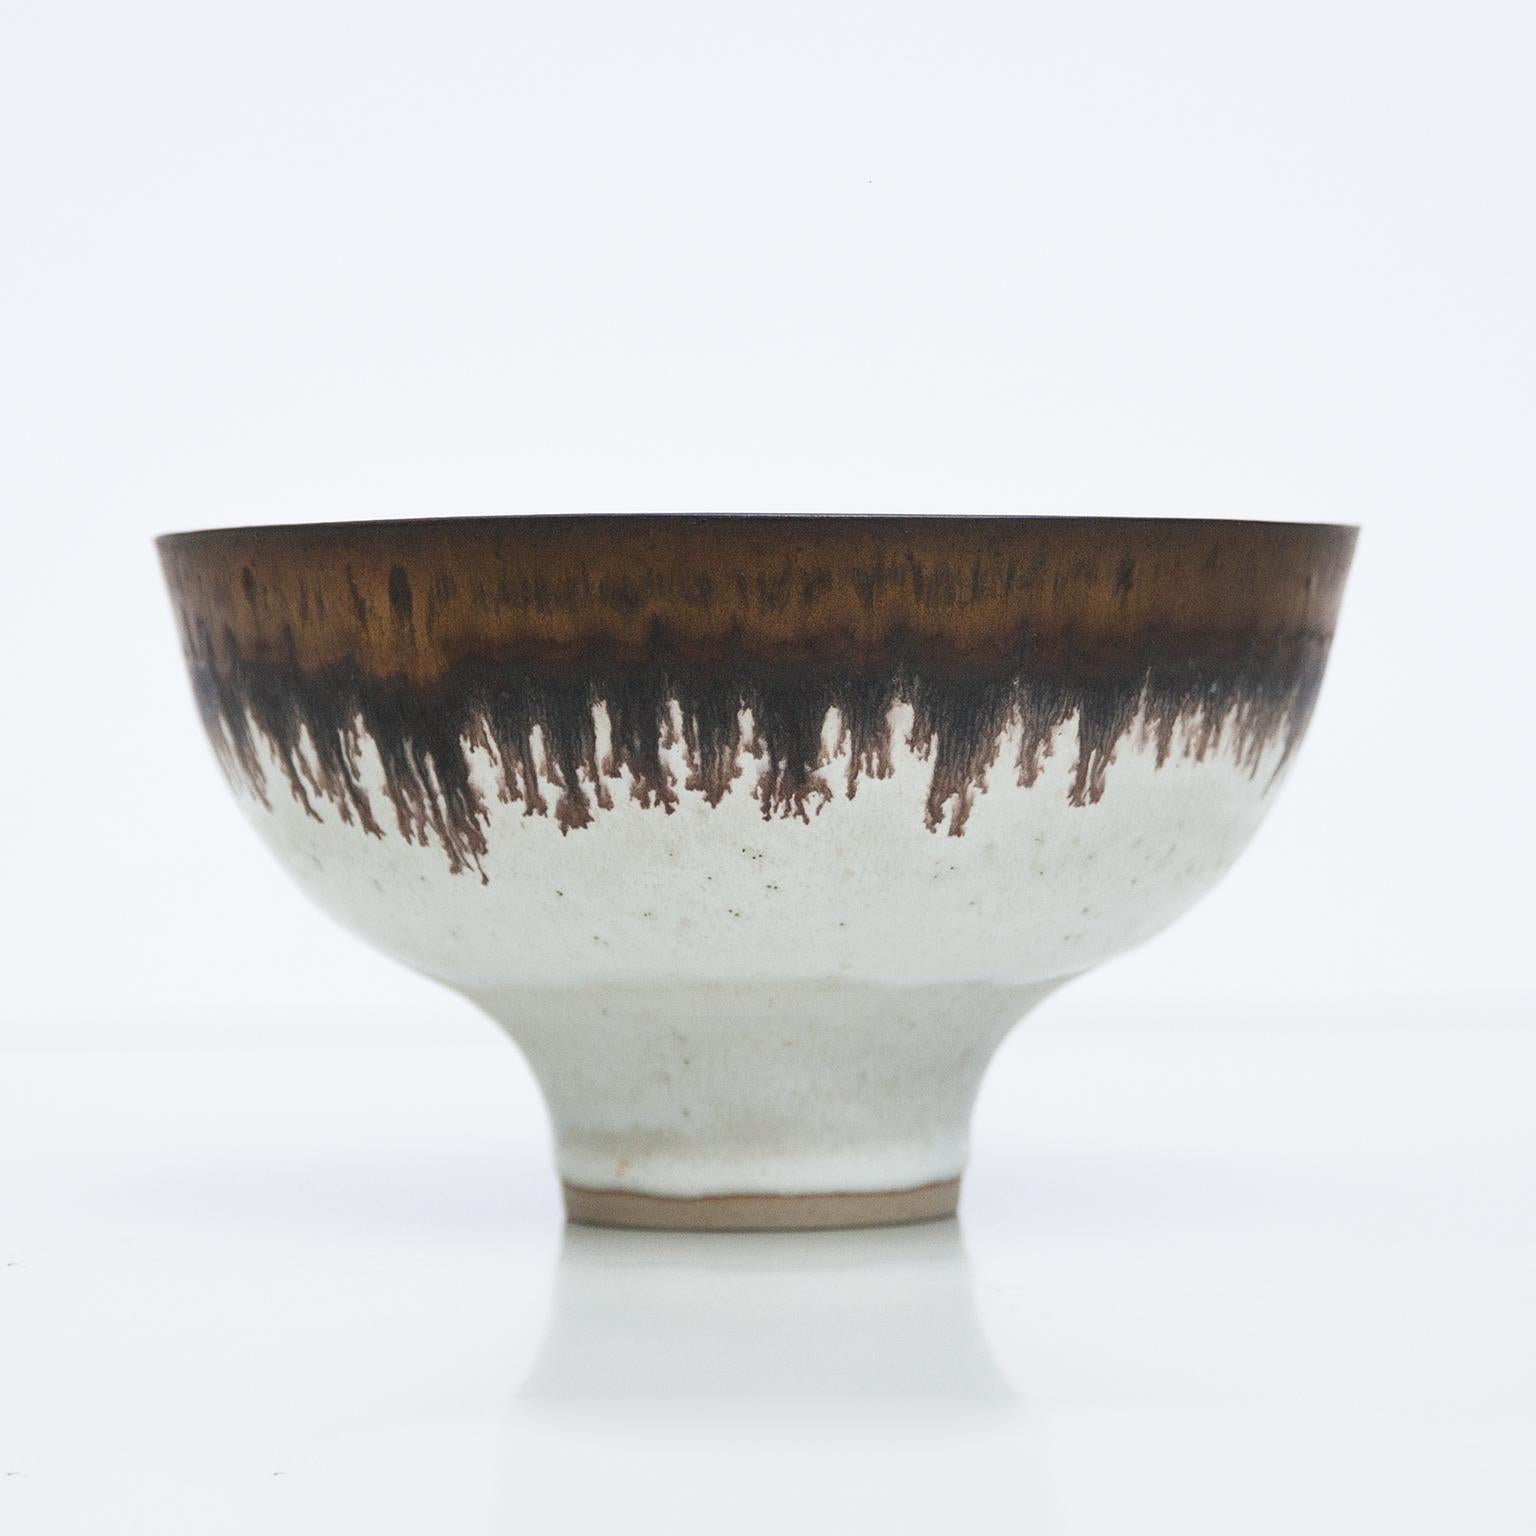 Bowl with manganese rim. Circa 1980. Porcelain. White, partially stone-grey and sand-colored grading and speckled glaze. The rim of the mouth inside and outside with a wide, bronze-coloured, shimmering manganese glaze band, ending in fine drops